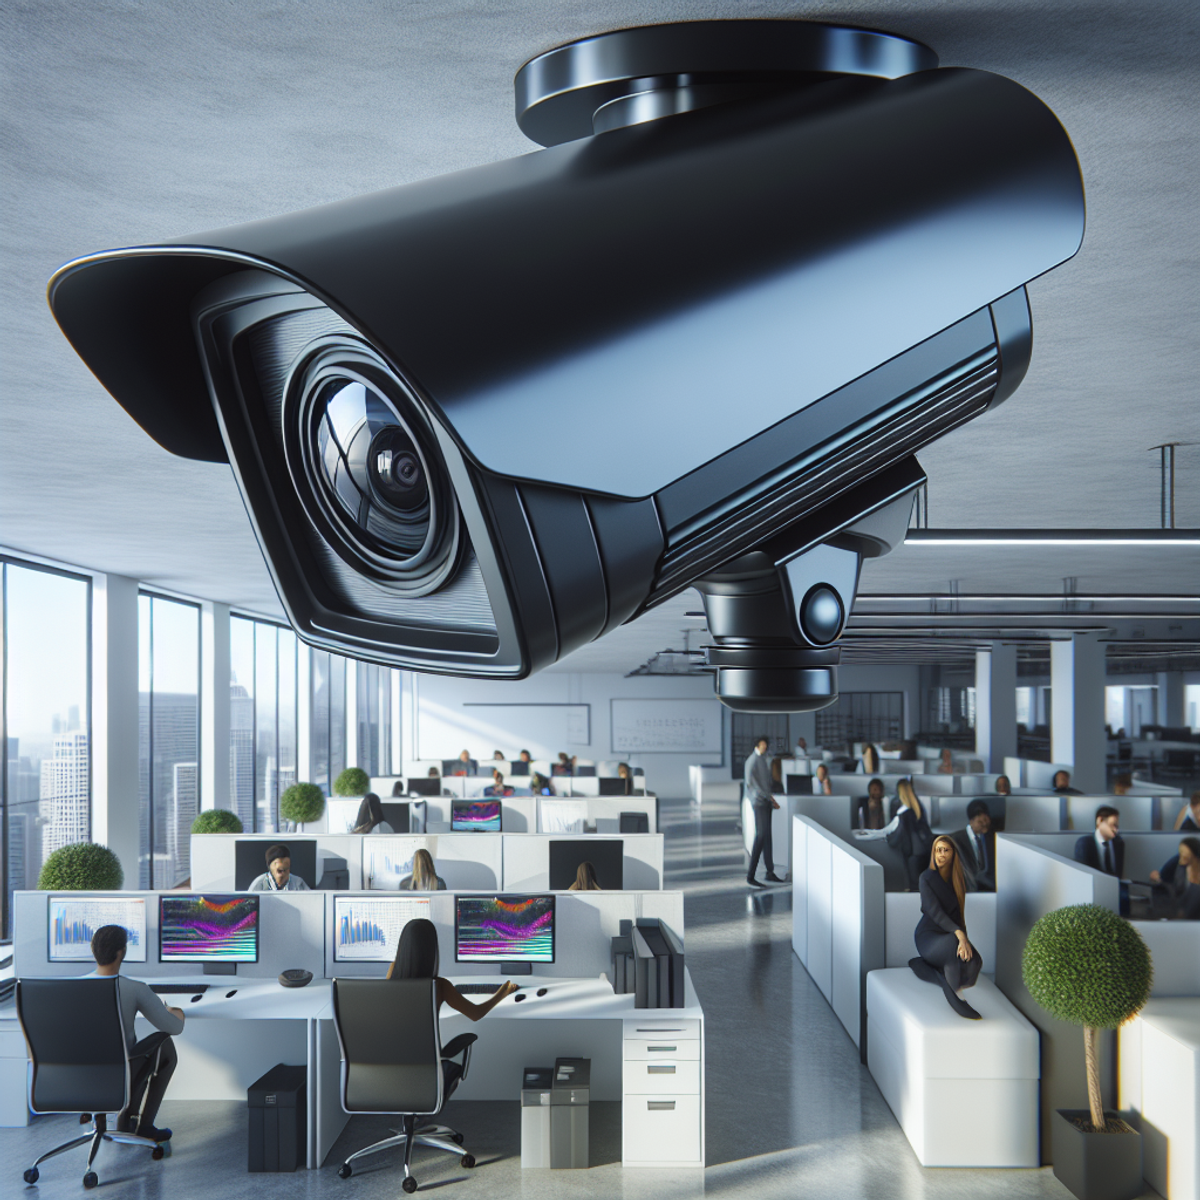 ToSeeSecurity | Perth's Site Security Camera System Experts